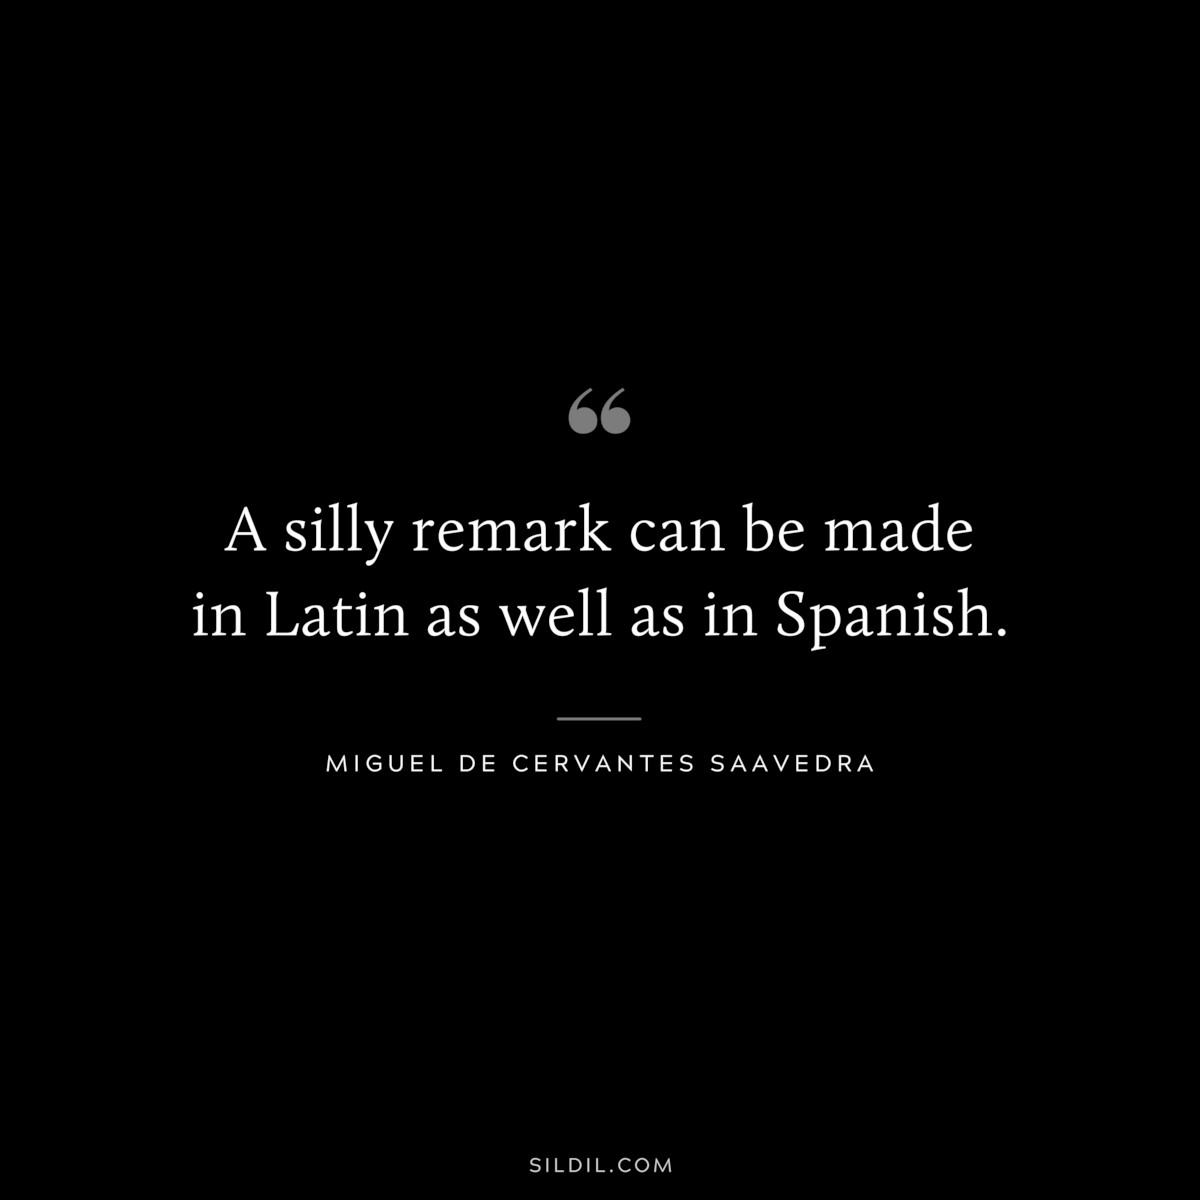 A silly remark can be made in Latin as well as in Spanish. ― Miguel de Cervantes Saavedra